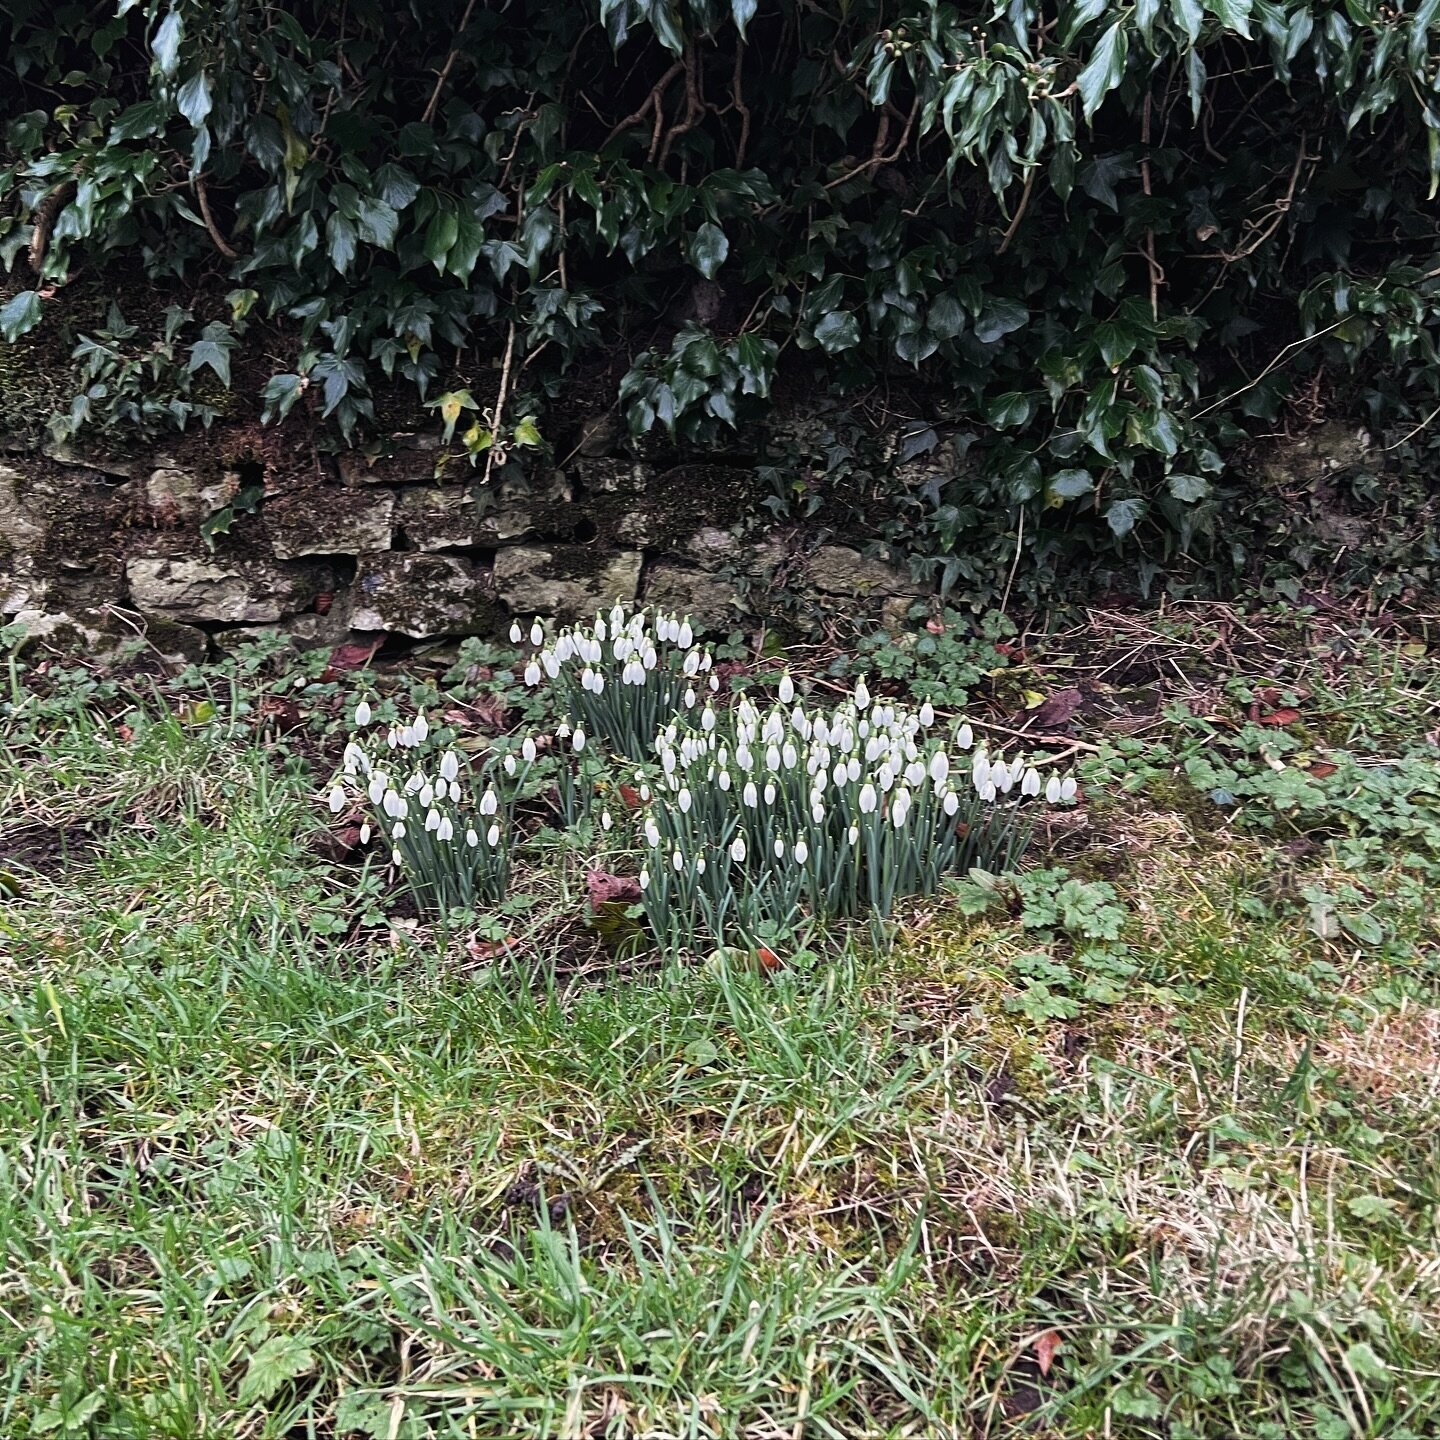 ✨ new beginnings ✨

There&rsquo;s something lovely about seeing snowdrops grow through the cold, harsh weather we&rsquo;ve been having recently. This made me think about how many times do we actually take a step back and think about how far we have c